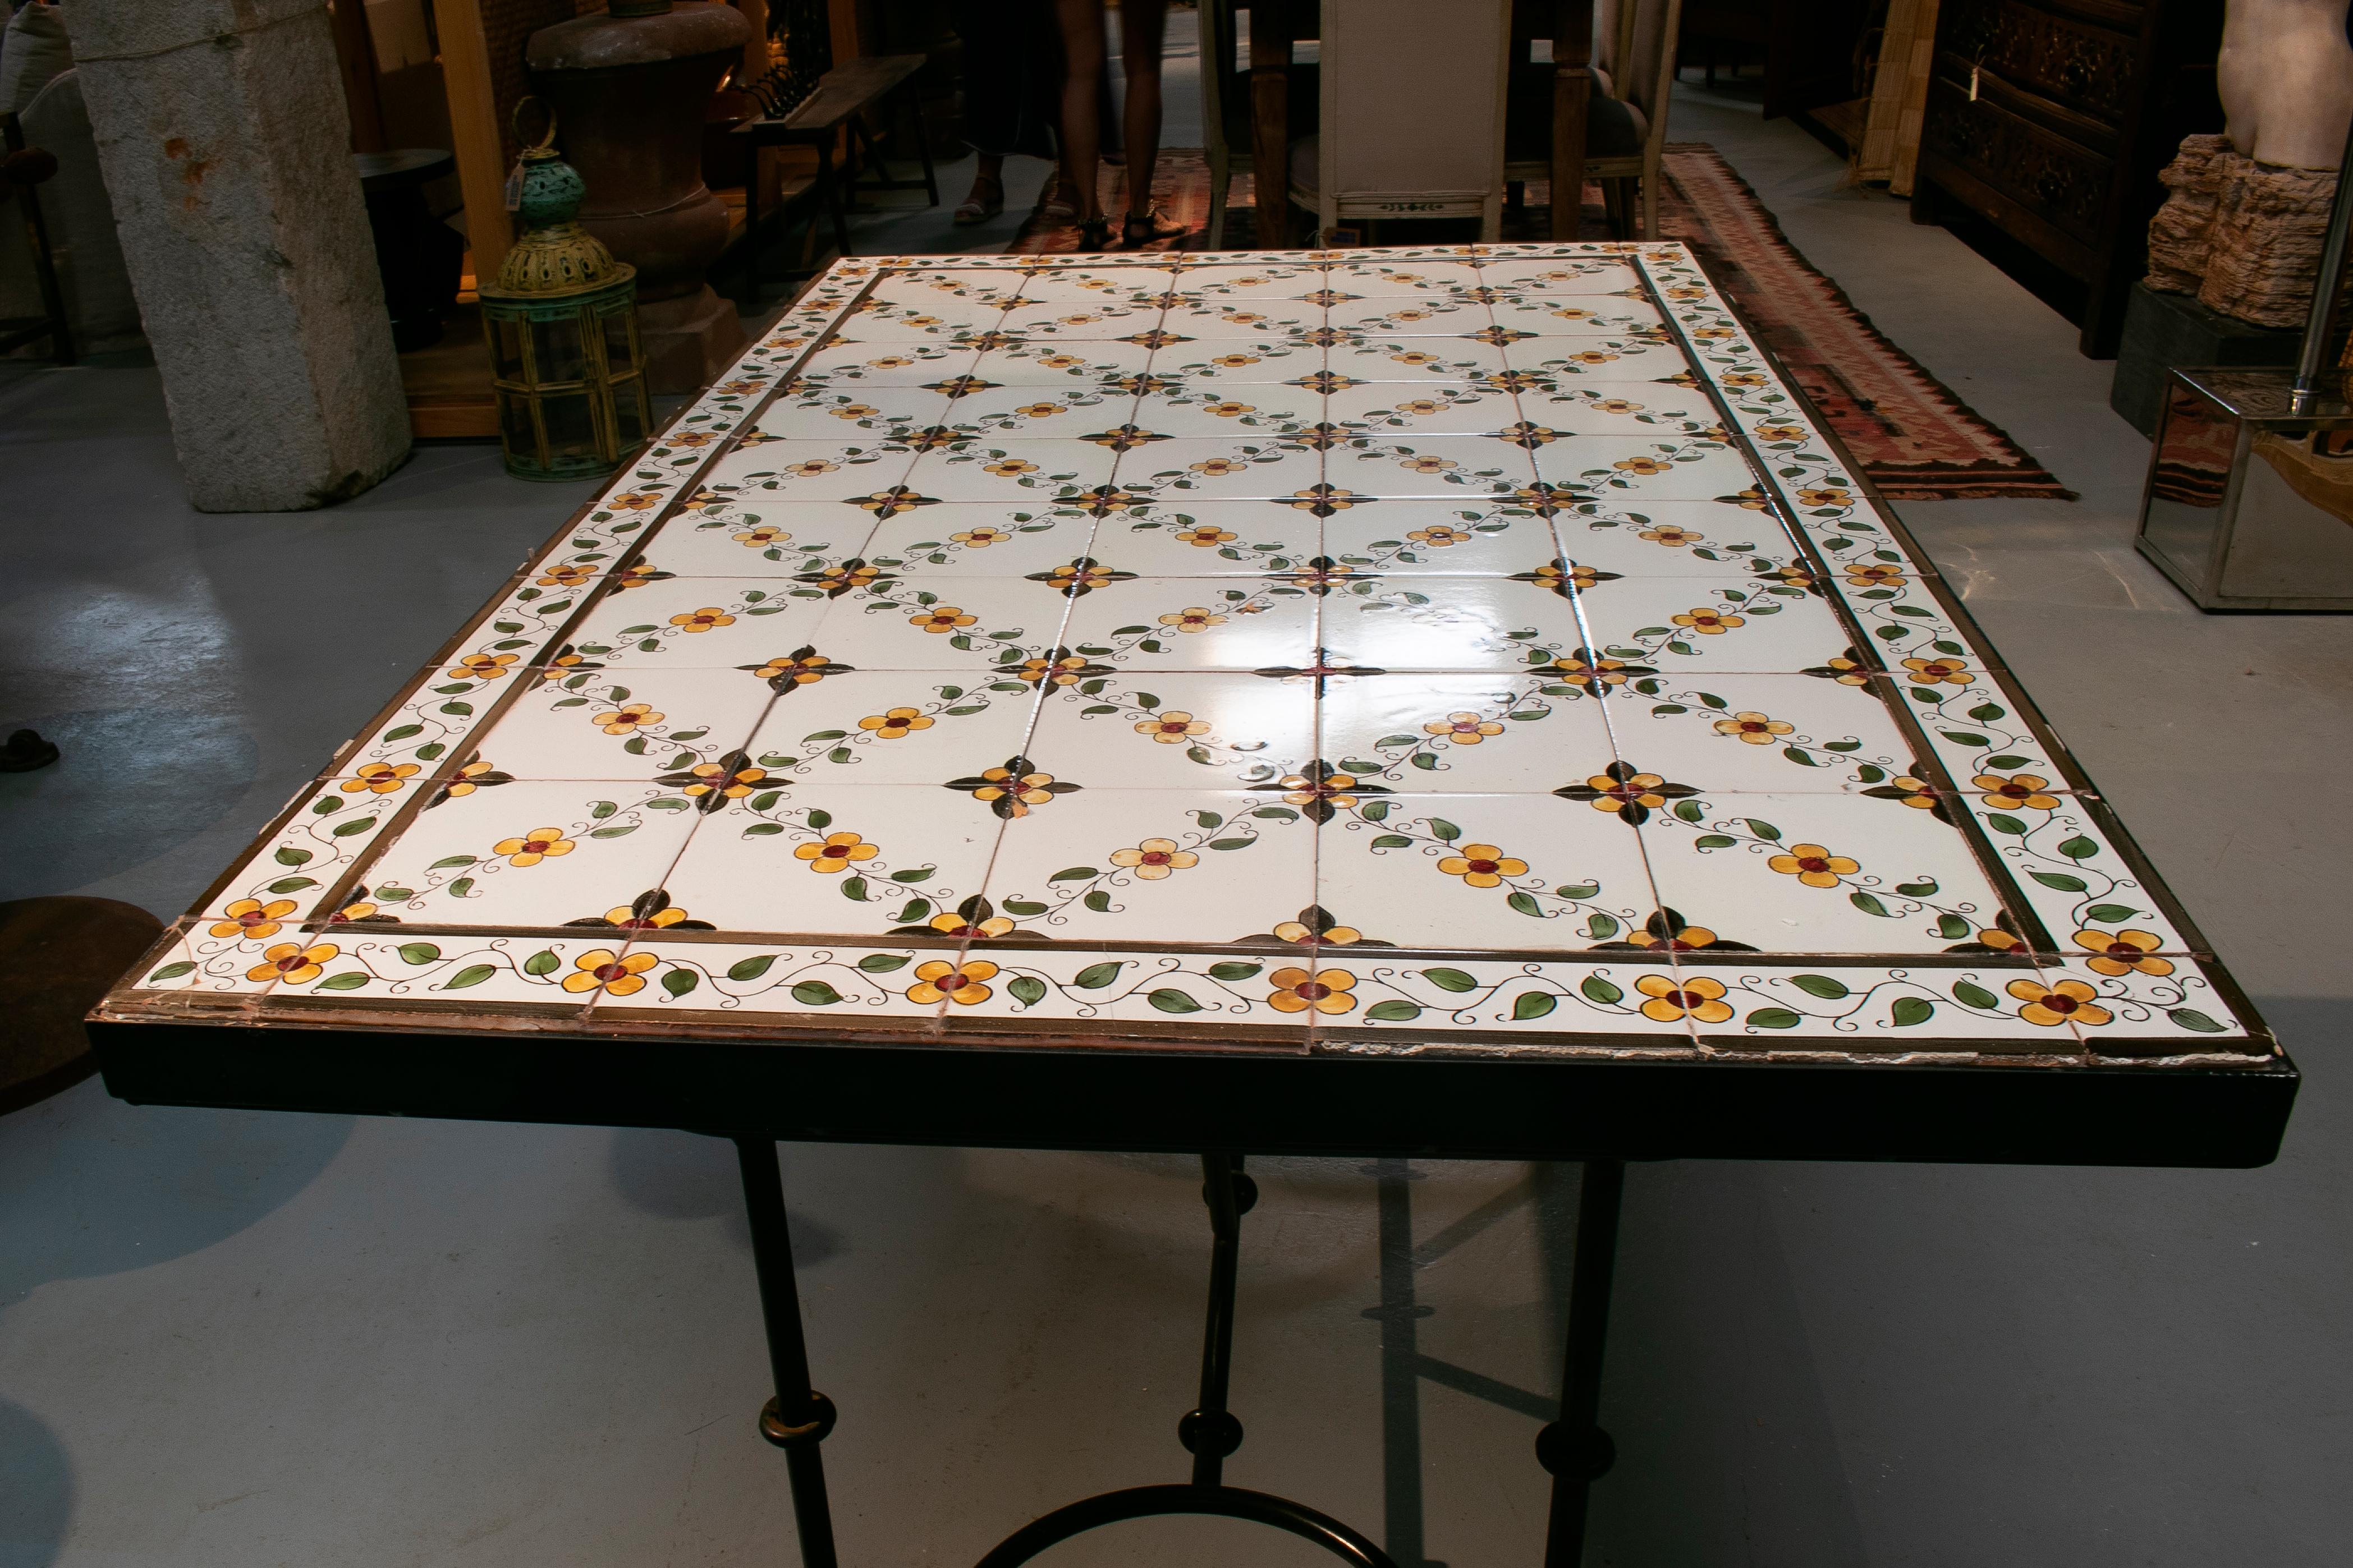 1980s Spanish glazed ceramic top kitchen iron table. Some tiles are cracked.